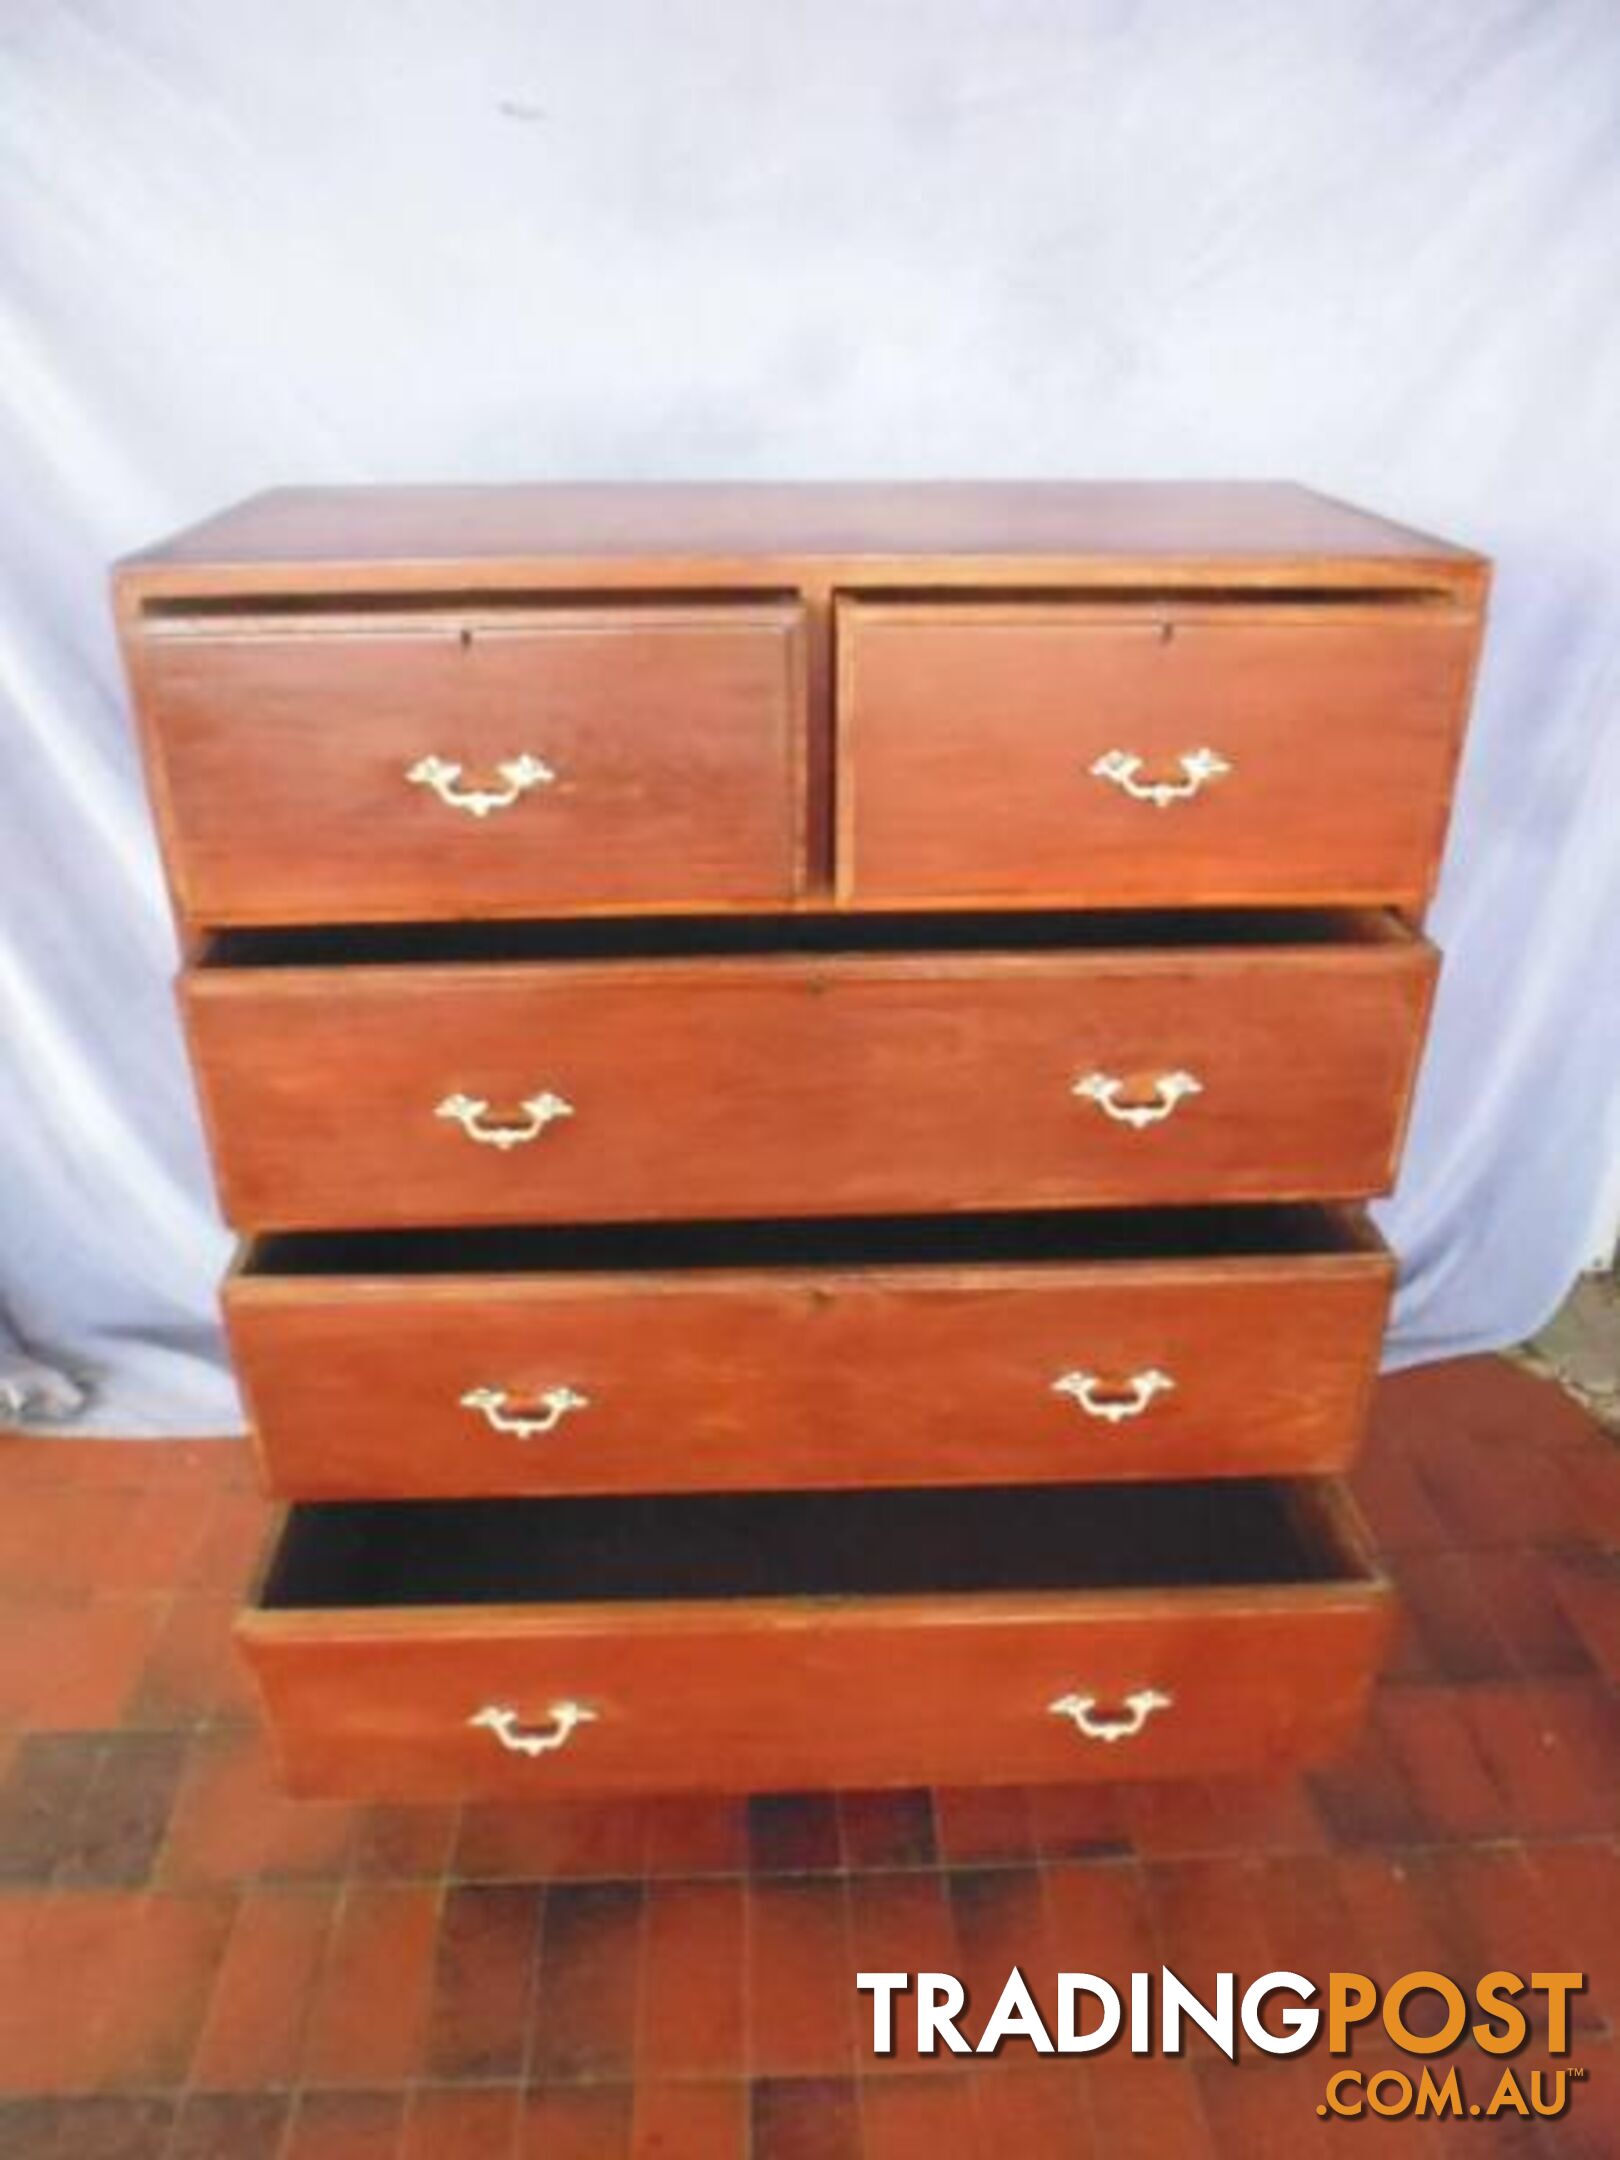 Teak Campaign Chest of Drawers, 2 Piece, 370064